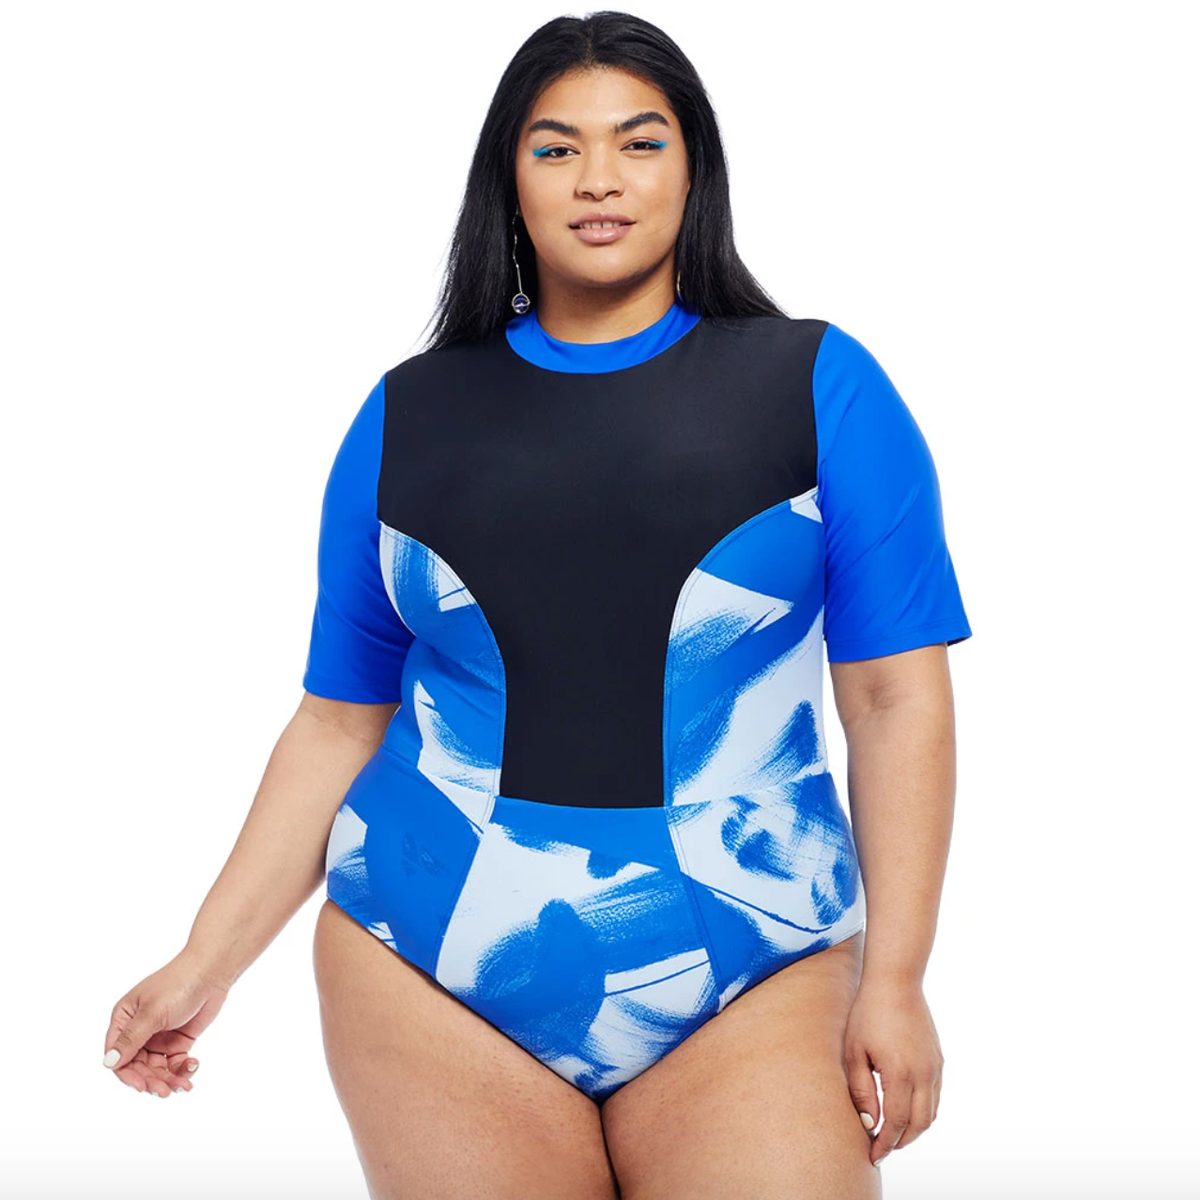 Plus Size Exercise Swimsuit | vlr.eng.br